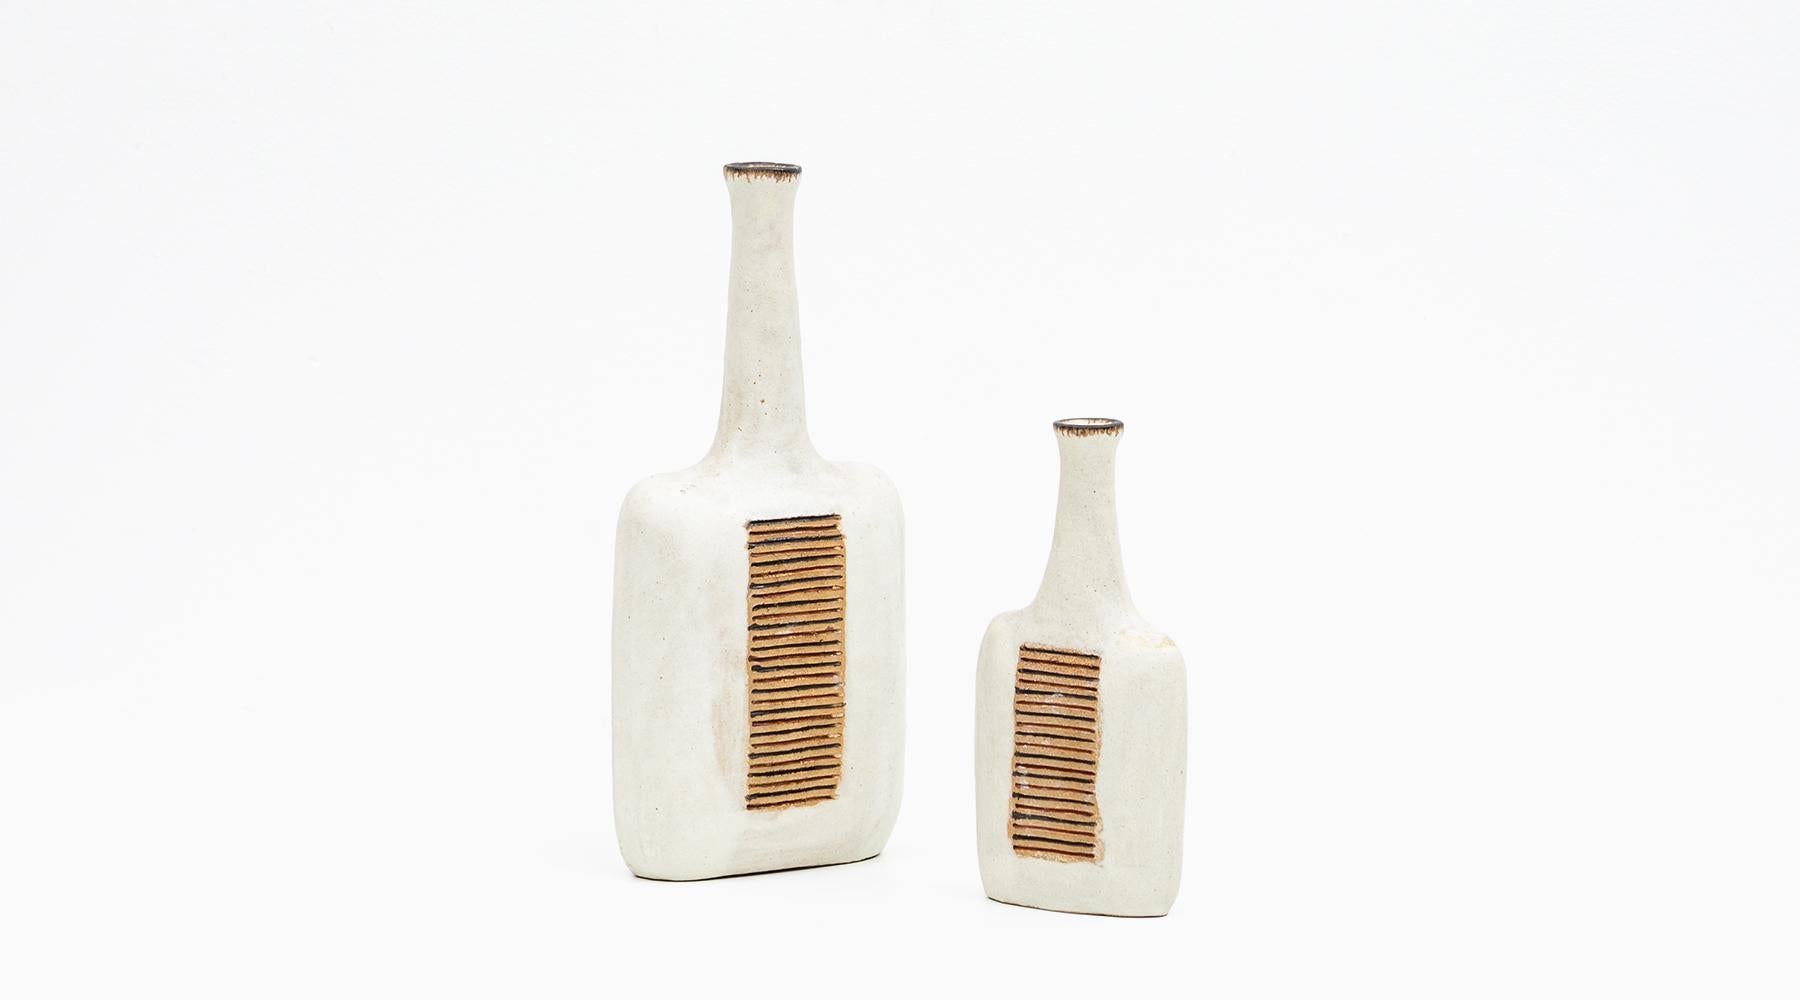 Stoneware in earth color, set of two vases, ceramic, Bruno Gambone, Italy, 1980s.

Two beautiful organic objects made of ceramic. The multifaceted artist Bruno Gambone was a master of his handcraft. Both vases have a relief detail in mustard and